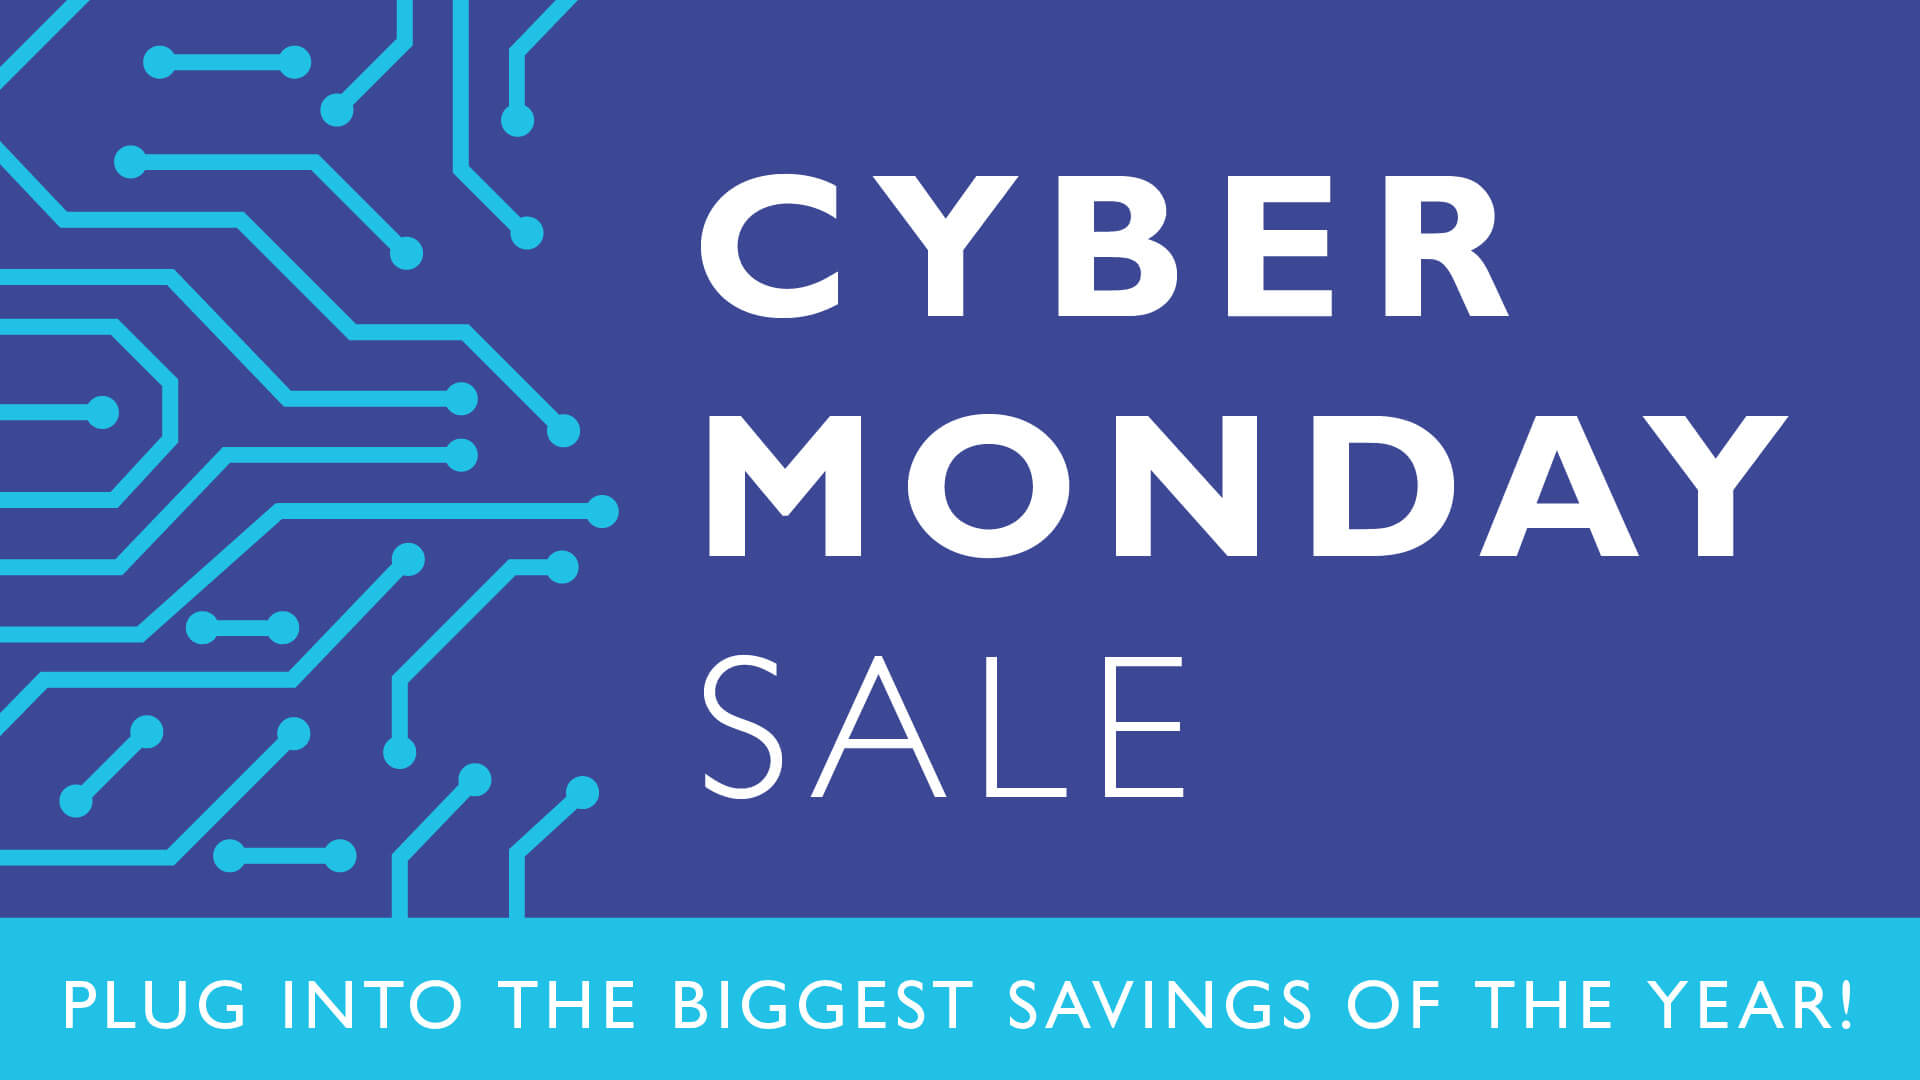 Cyber Monday Sale - Plug into the biggest savings of the year